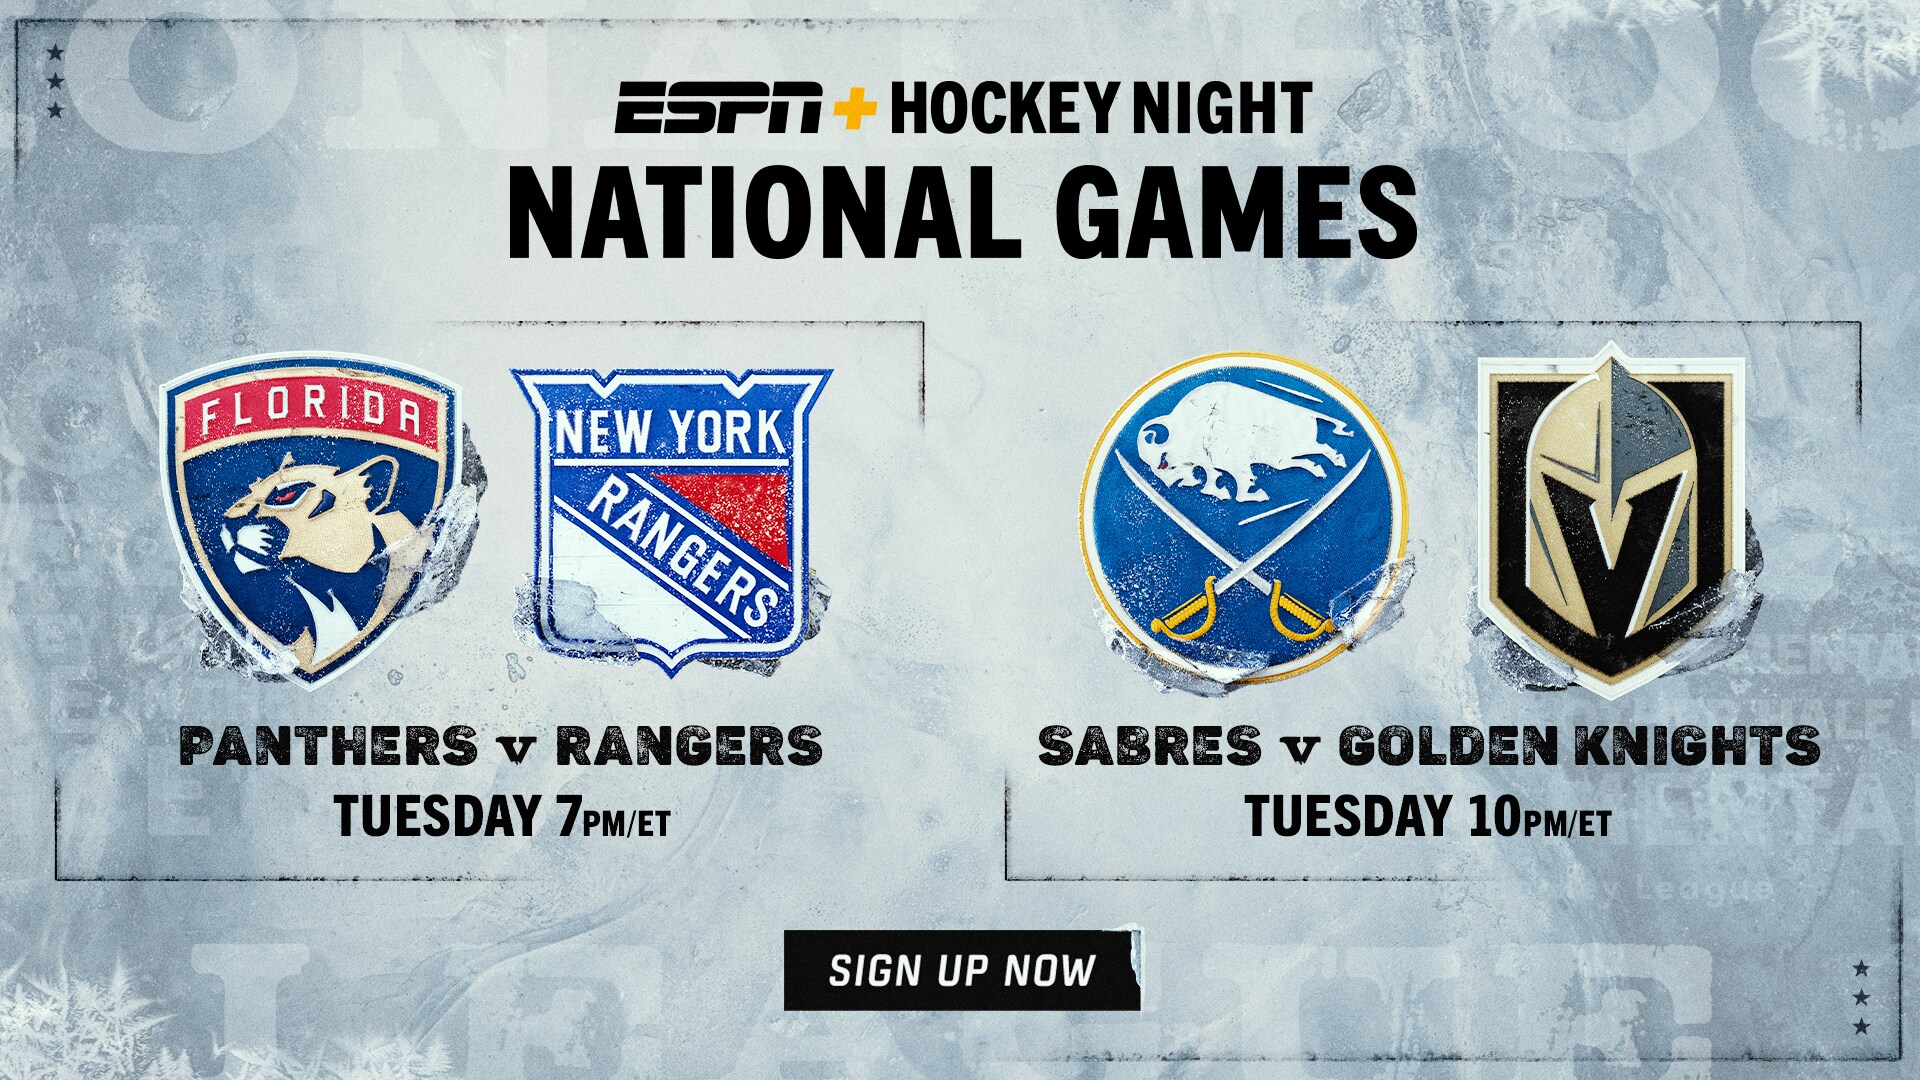 Exclusively on ESPN+ and Hulu:  Two National Hockey League Games Tuesday Night, Feb. 1